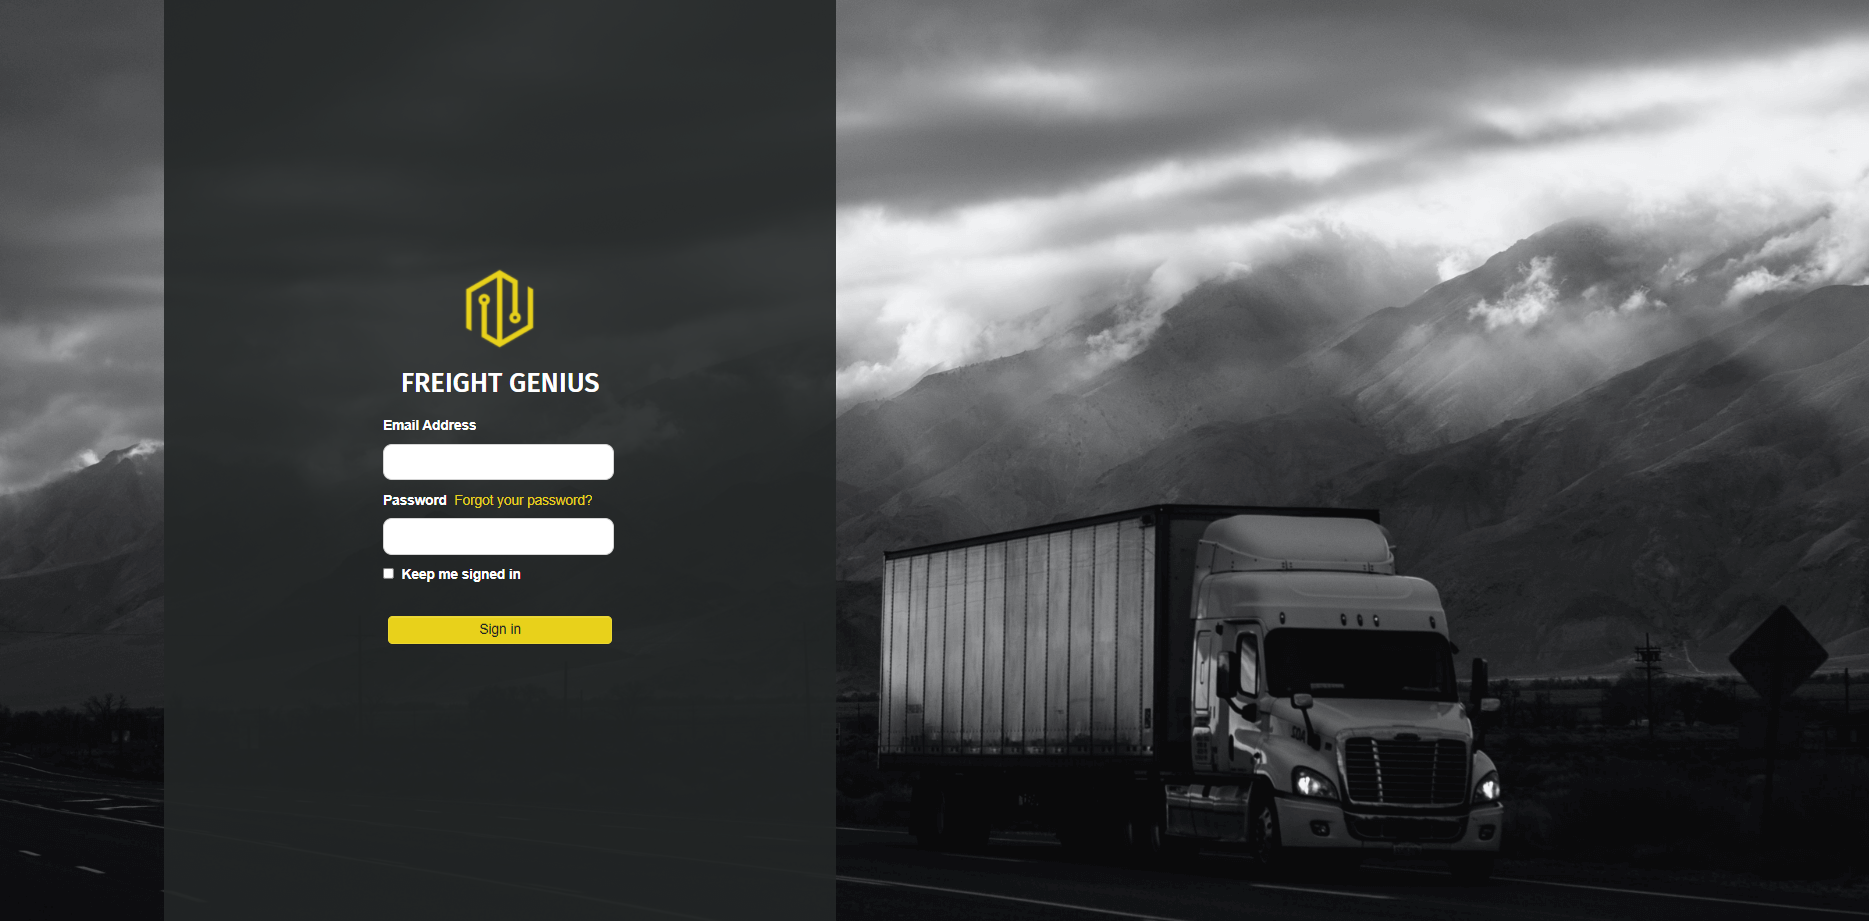 Freight Genius is an enterprise-level Transportation Management System (TMS) with the most informative and effective real-time freight capabilities in the industry. It's a fraction of the cost of most big systems and empowers you to scale!